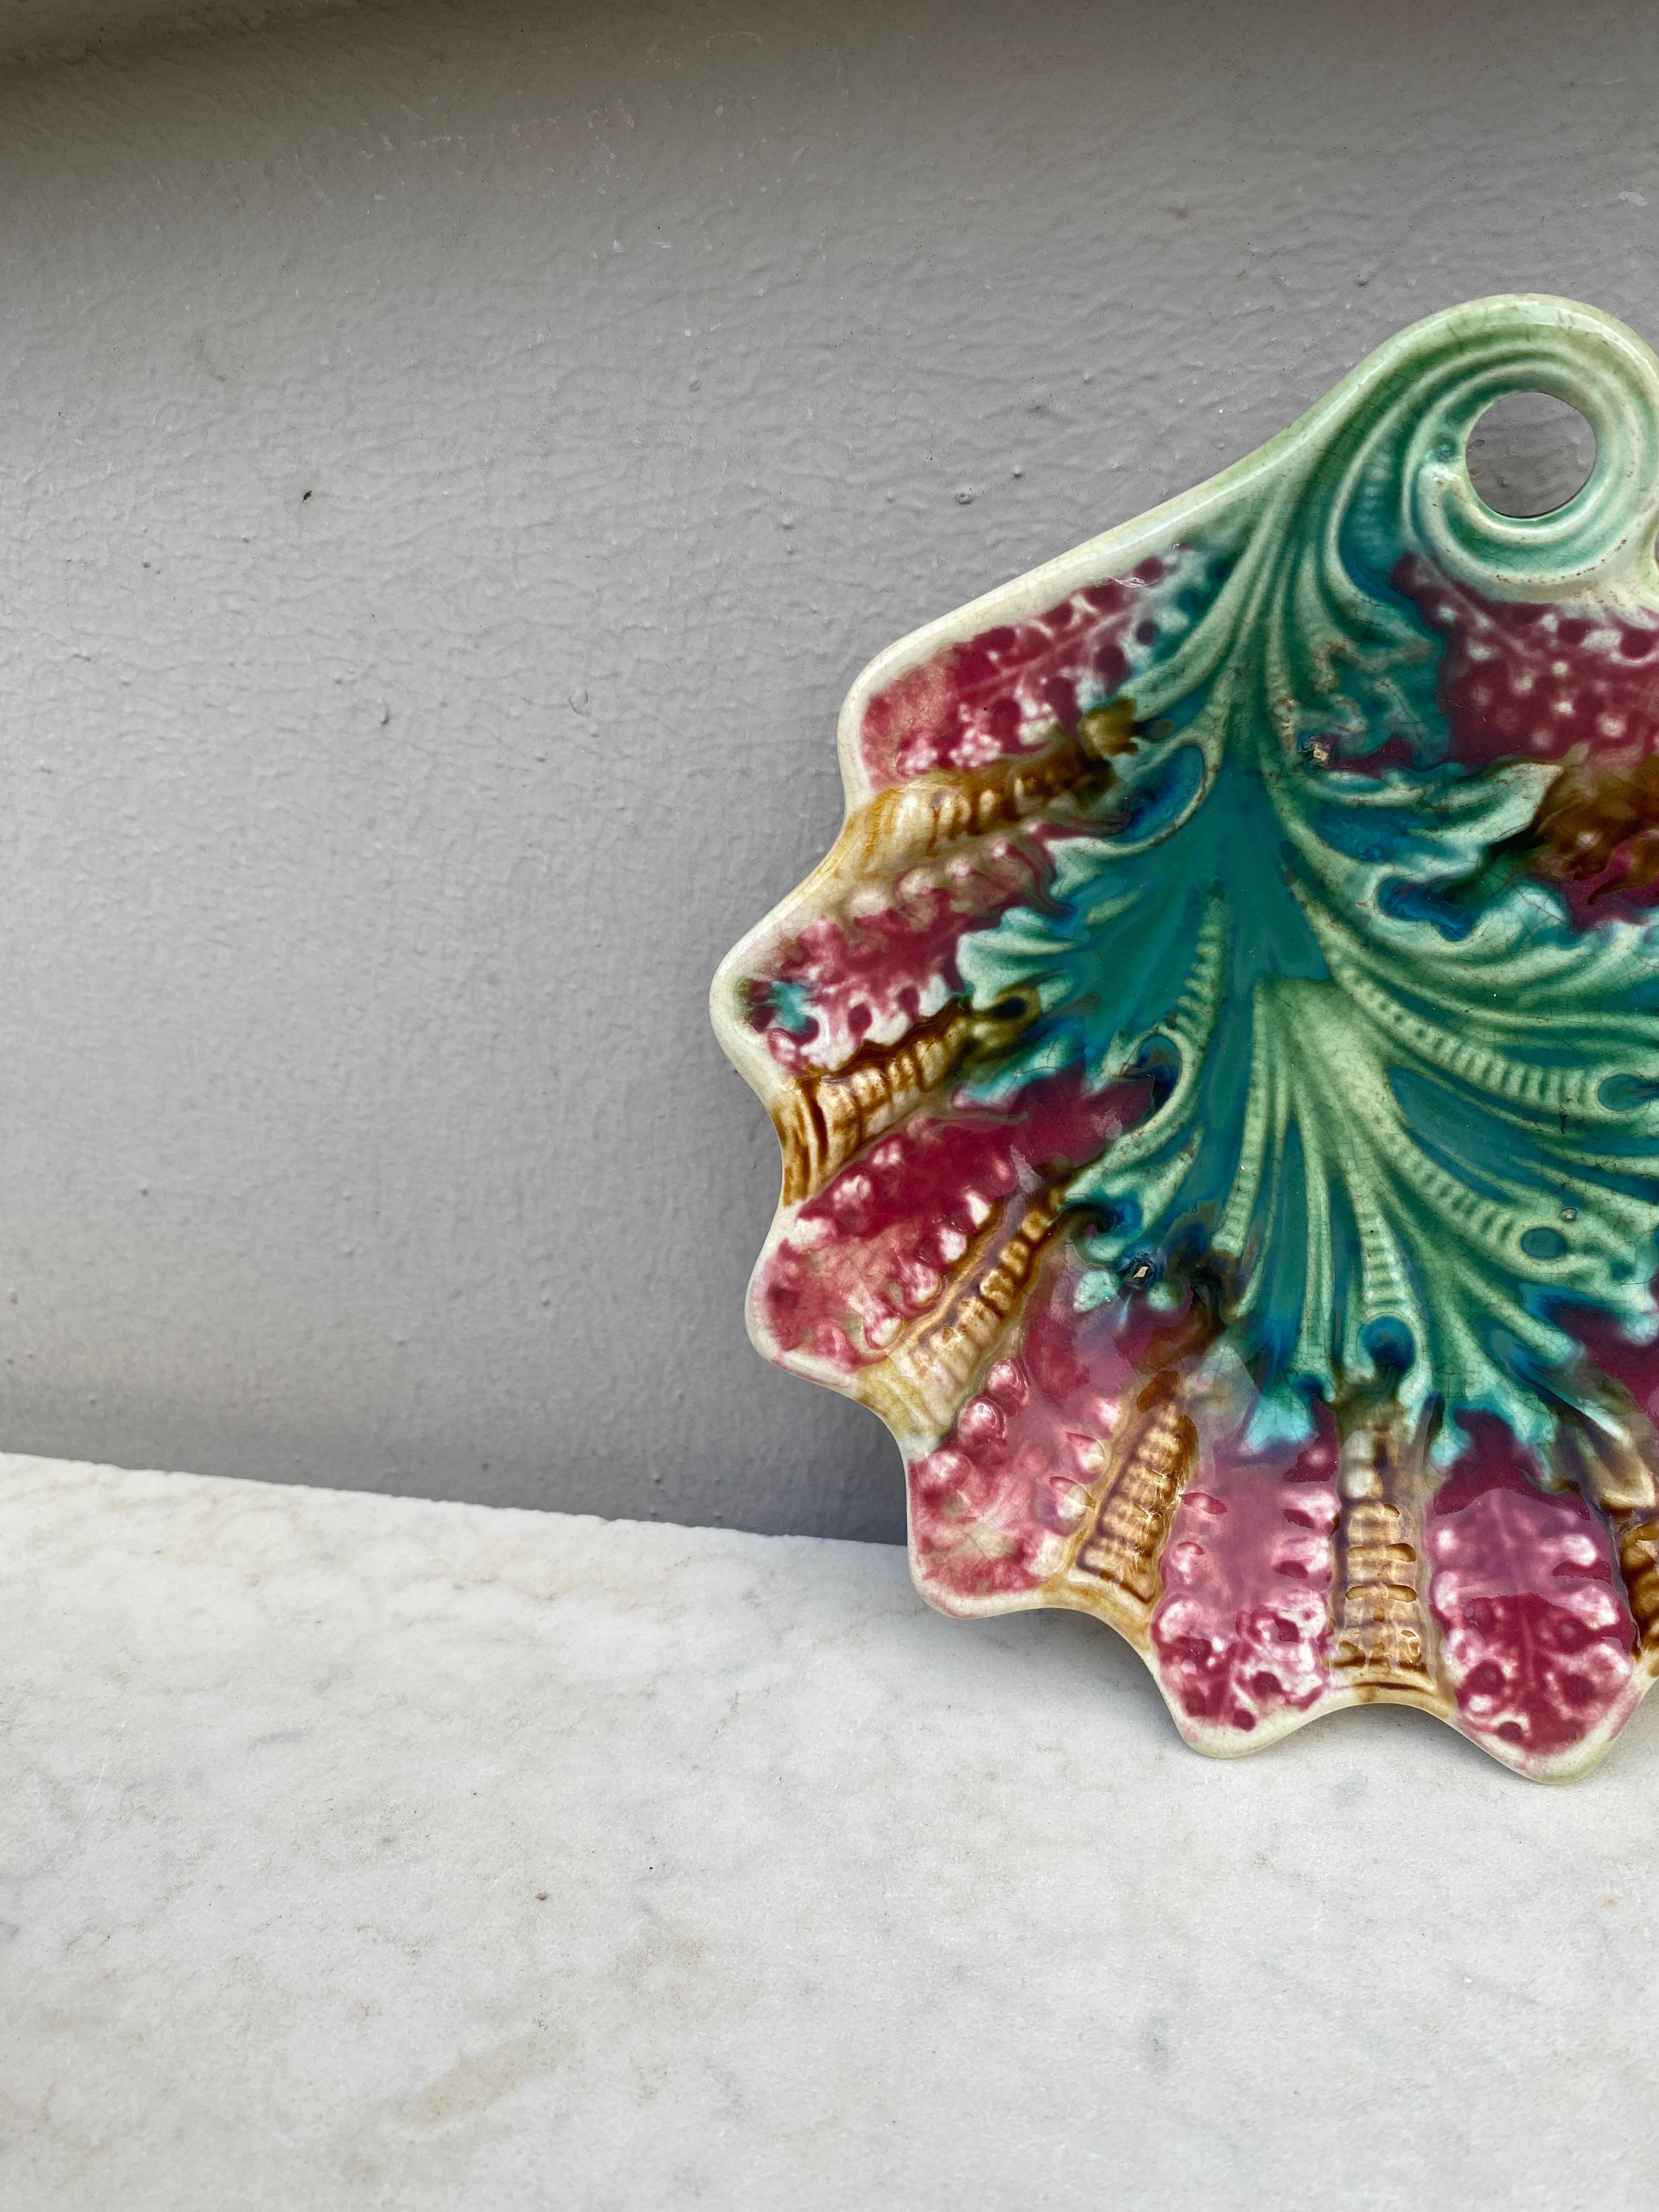 French Majolica dish with a curled leaf-stem handle, circa 1890.